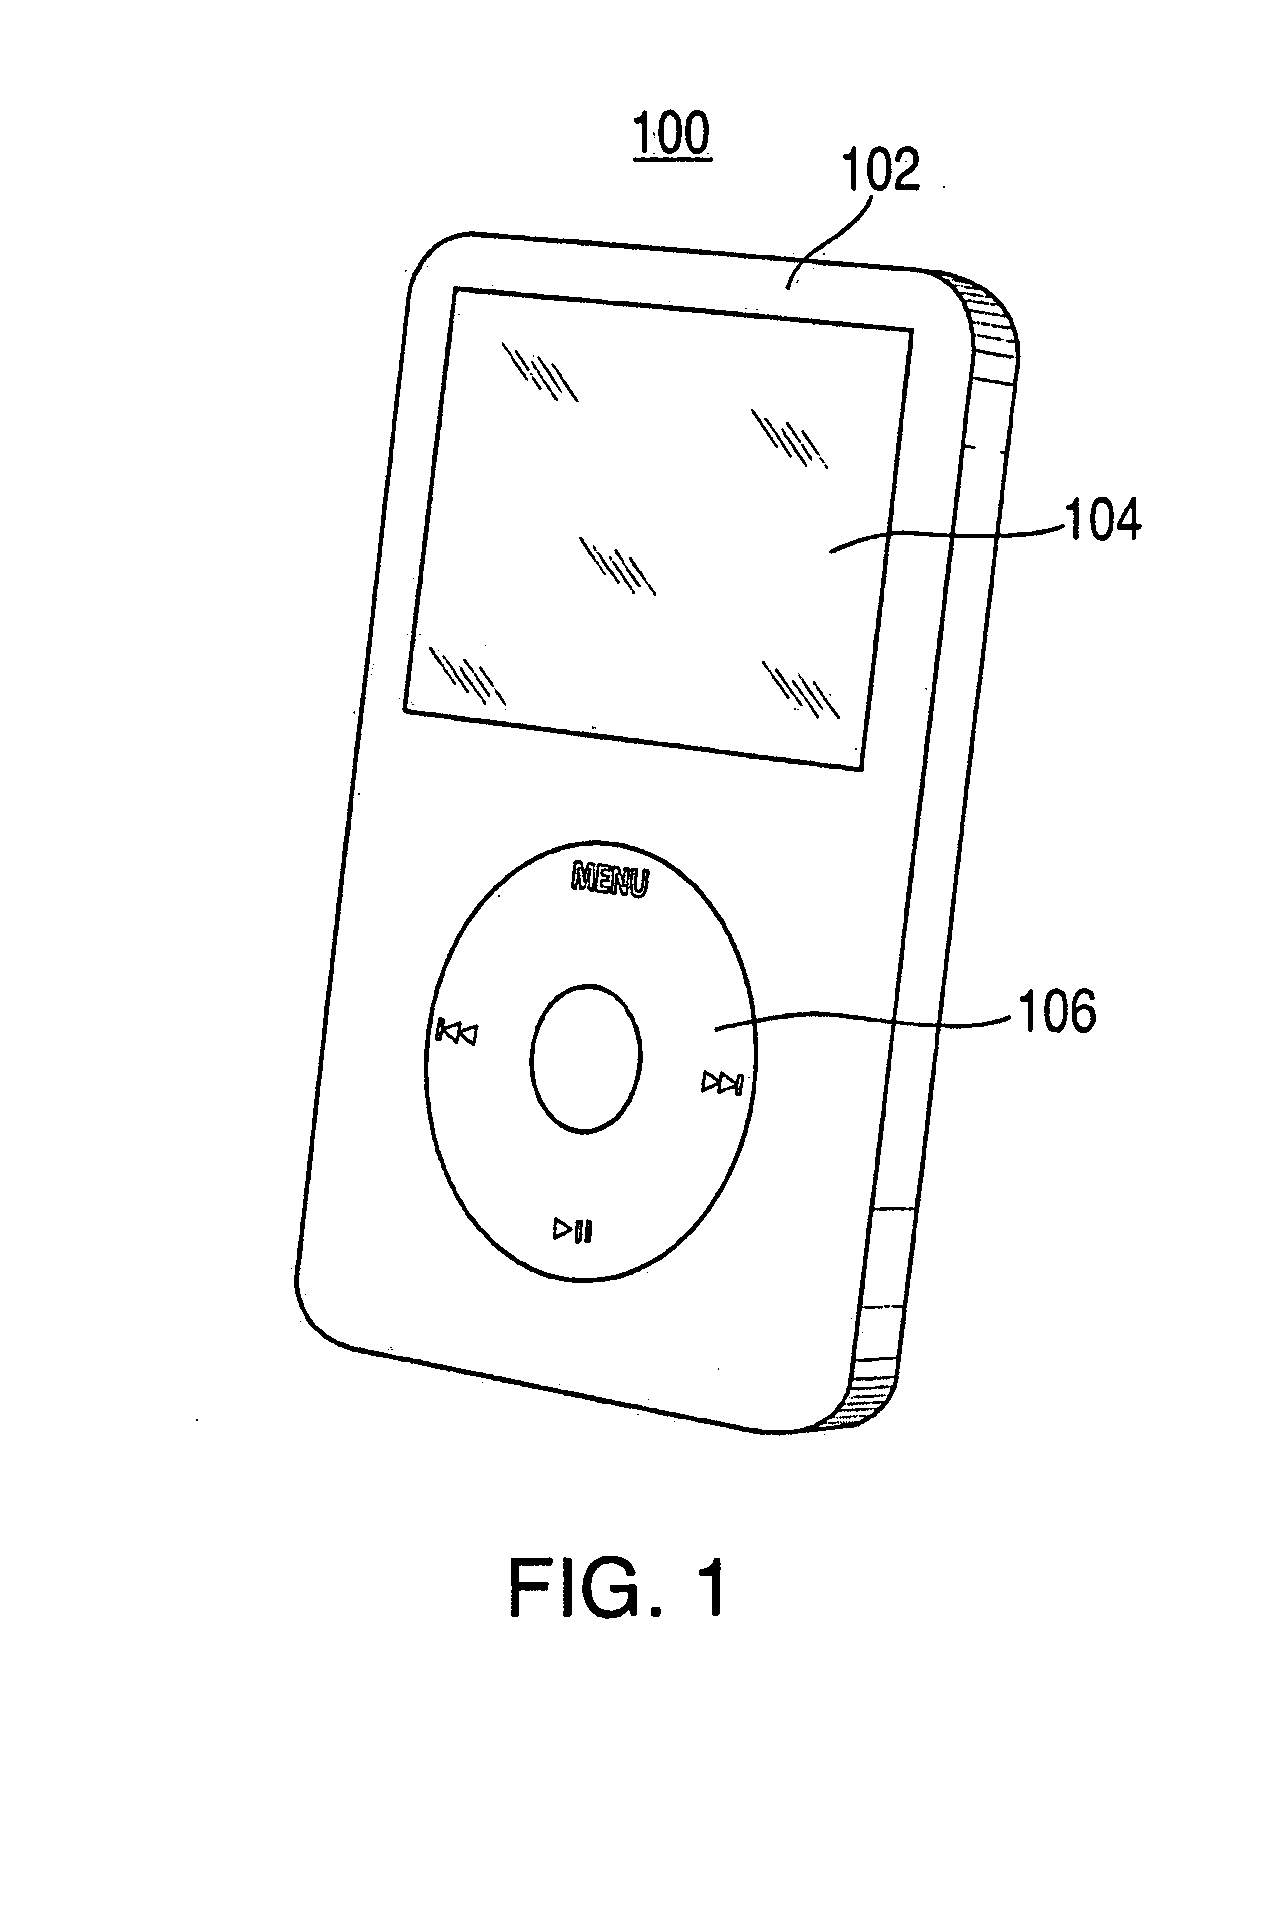 Systems and methods for identifying objects and providing information related to identified objects